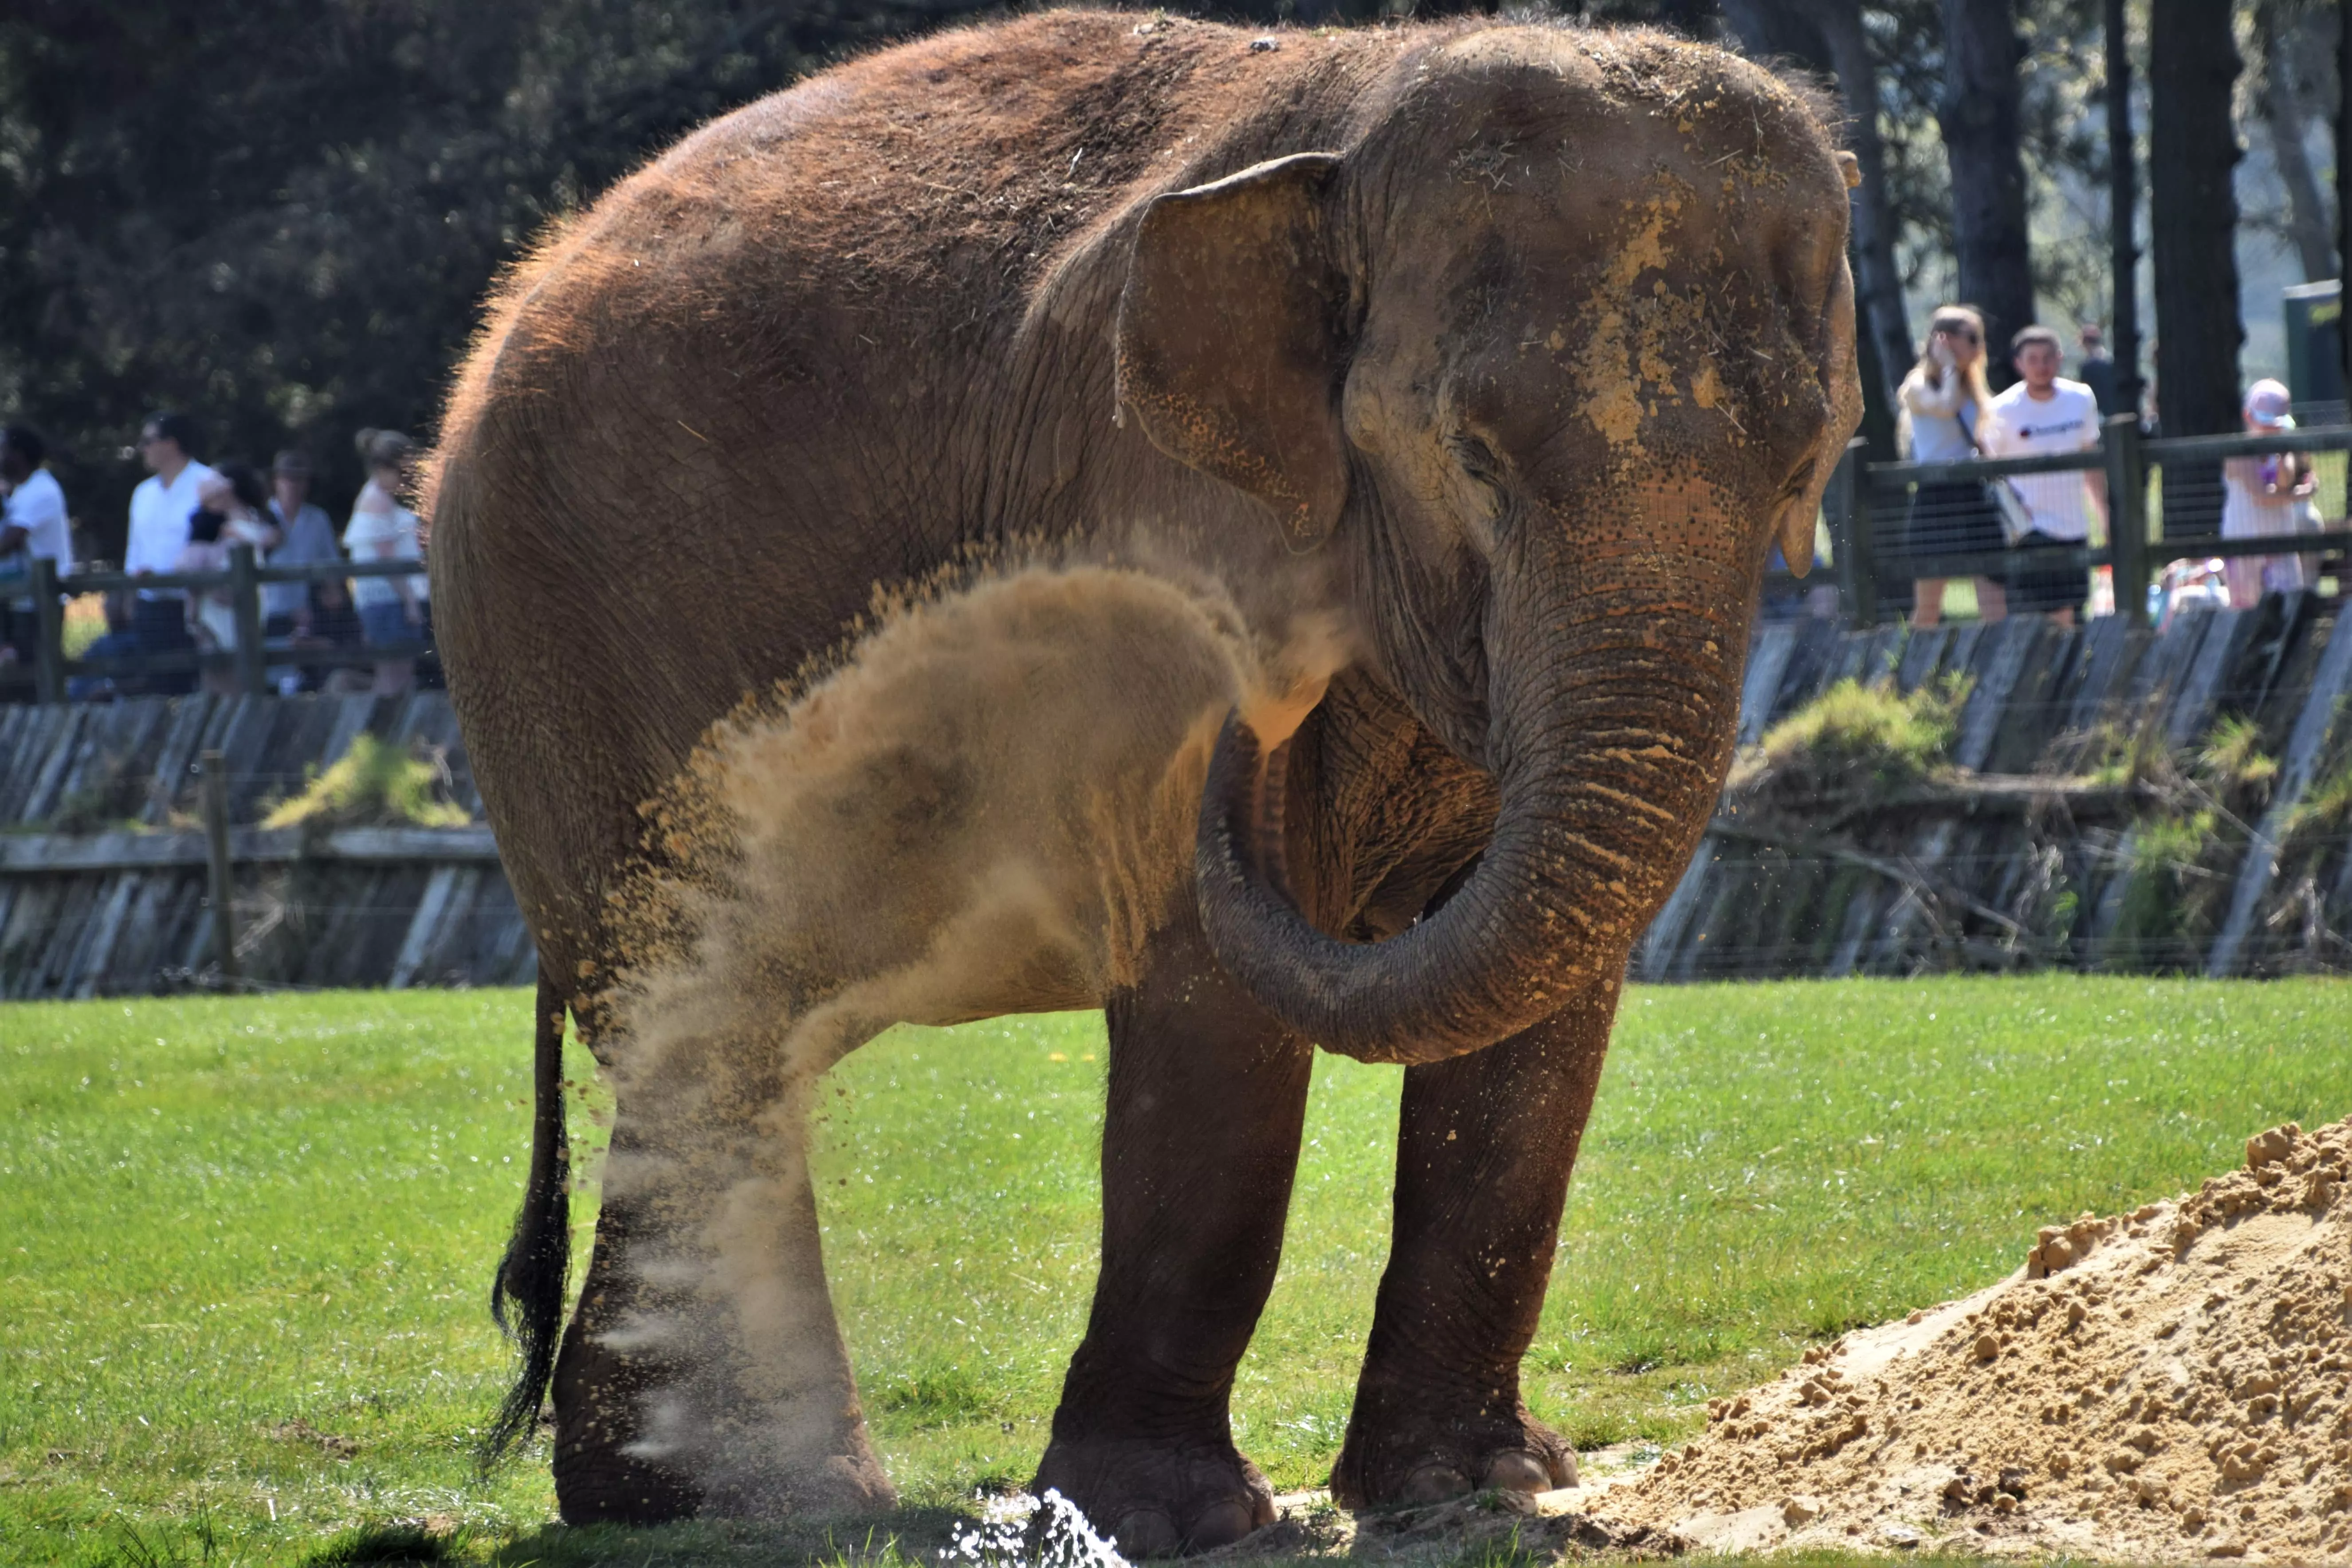 An elephant cleans itself at Whipsnade Zoo.